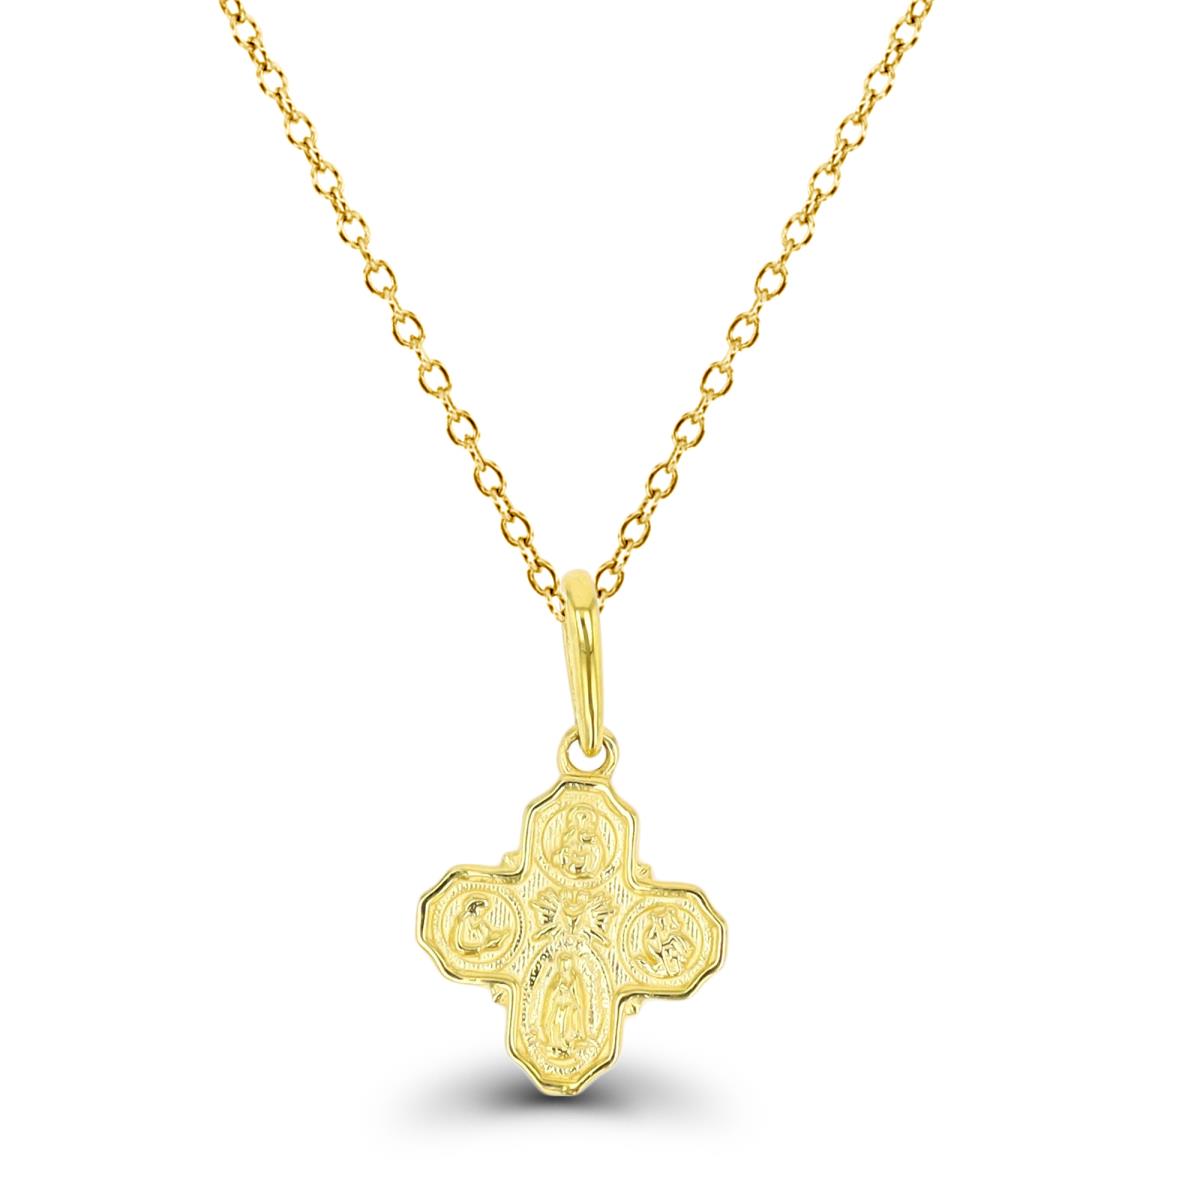 10K Yellow Gold 4 Way Cross 18" Necklace